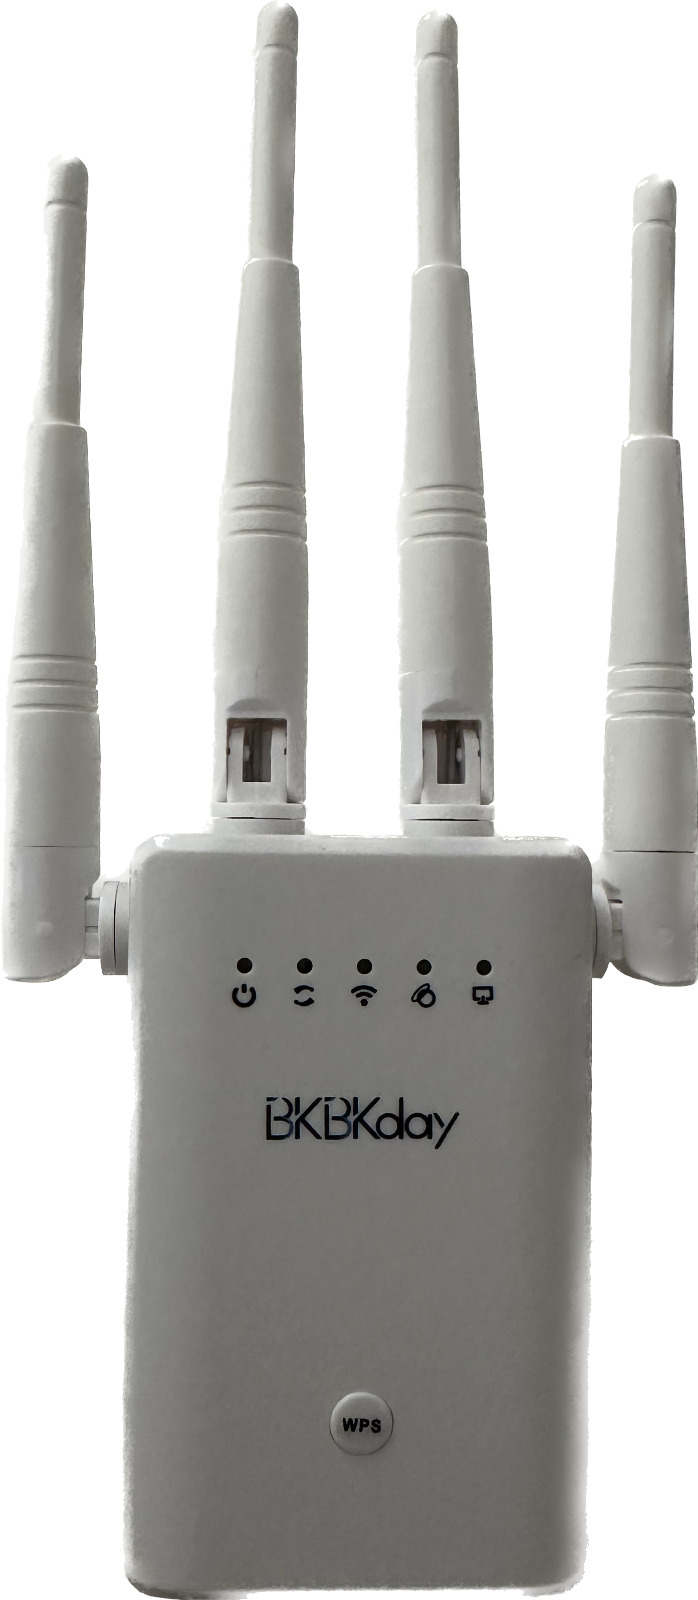 WiFi Extender Signal Booster, Coverage up to 8000 sq.ft Wireless Internet Repeat